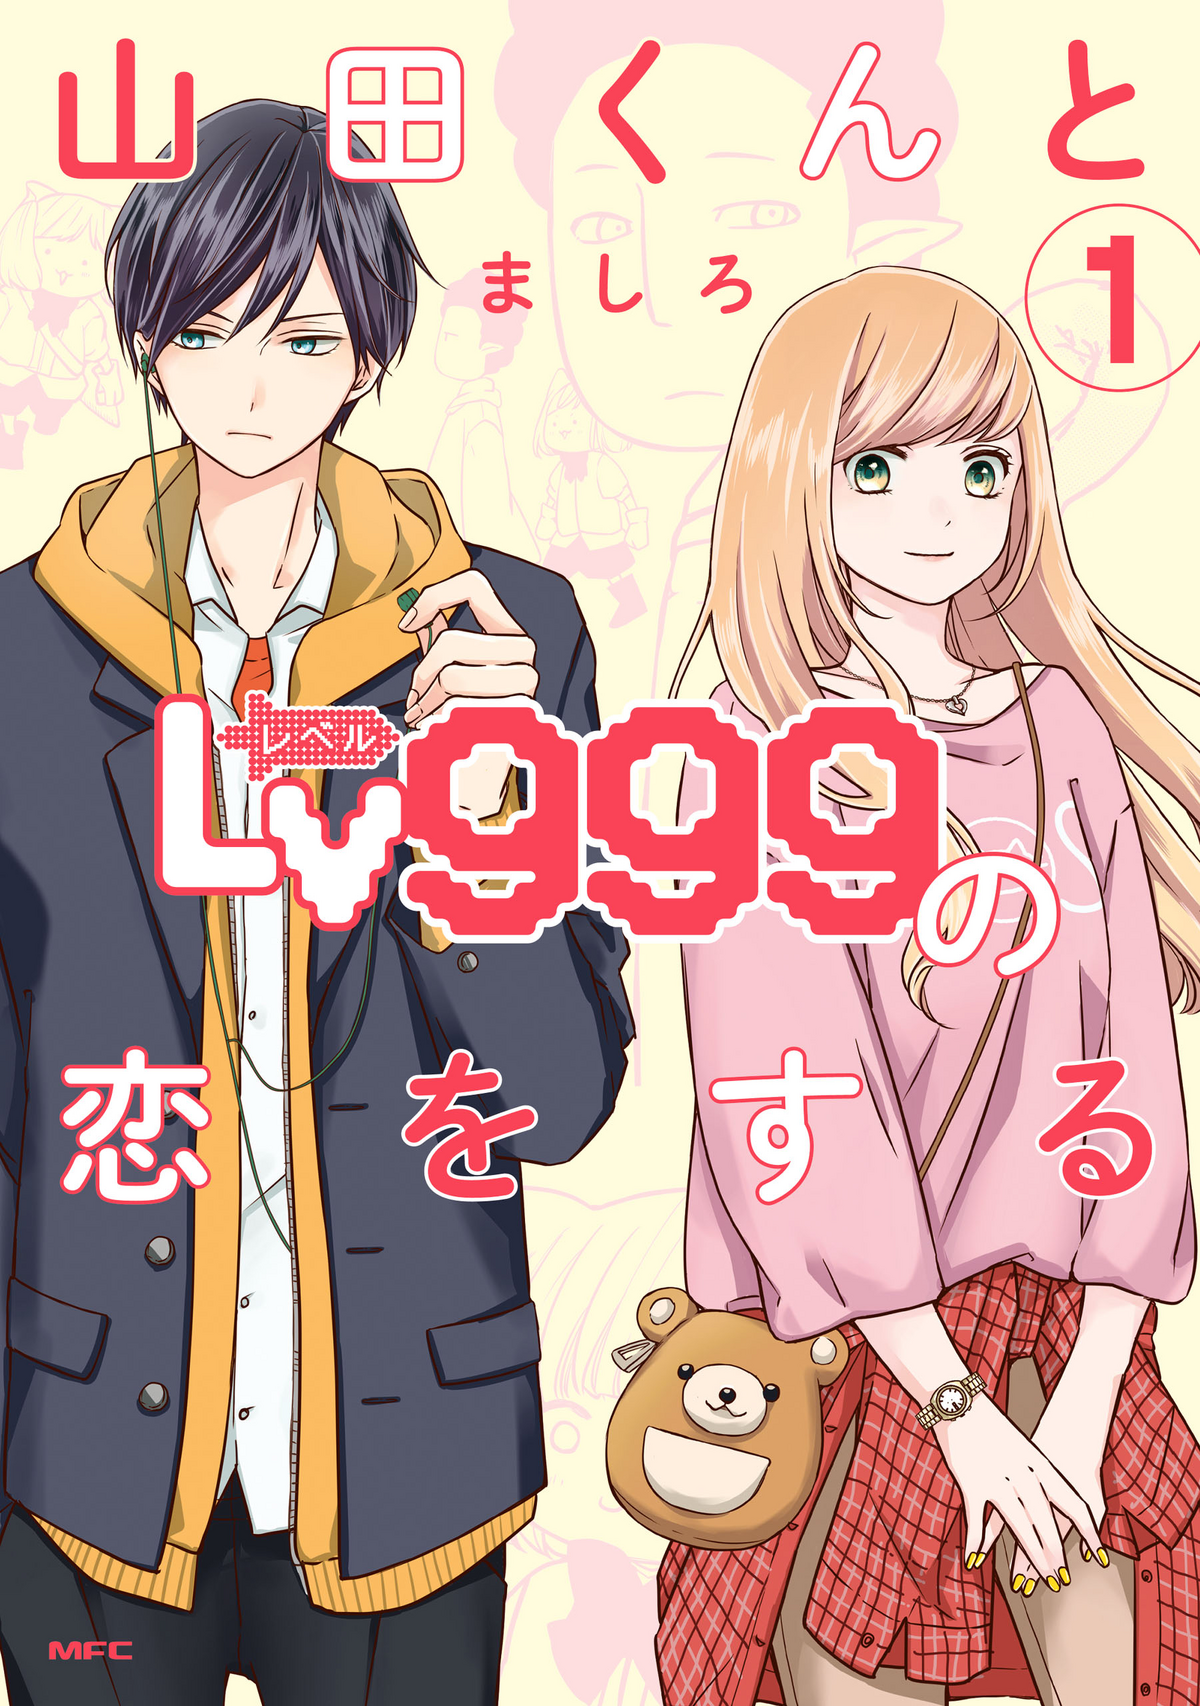 My Love Story with Yamada-kun at Lv999 Volume 1 DVD/Blu-Ray Official Cover  : r/MyLoveStoryWithYamada